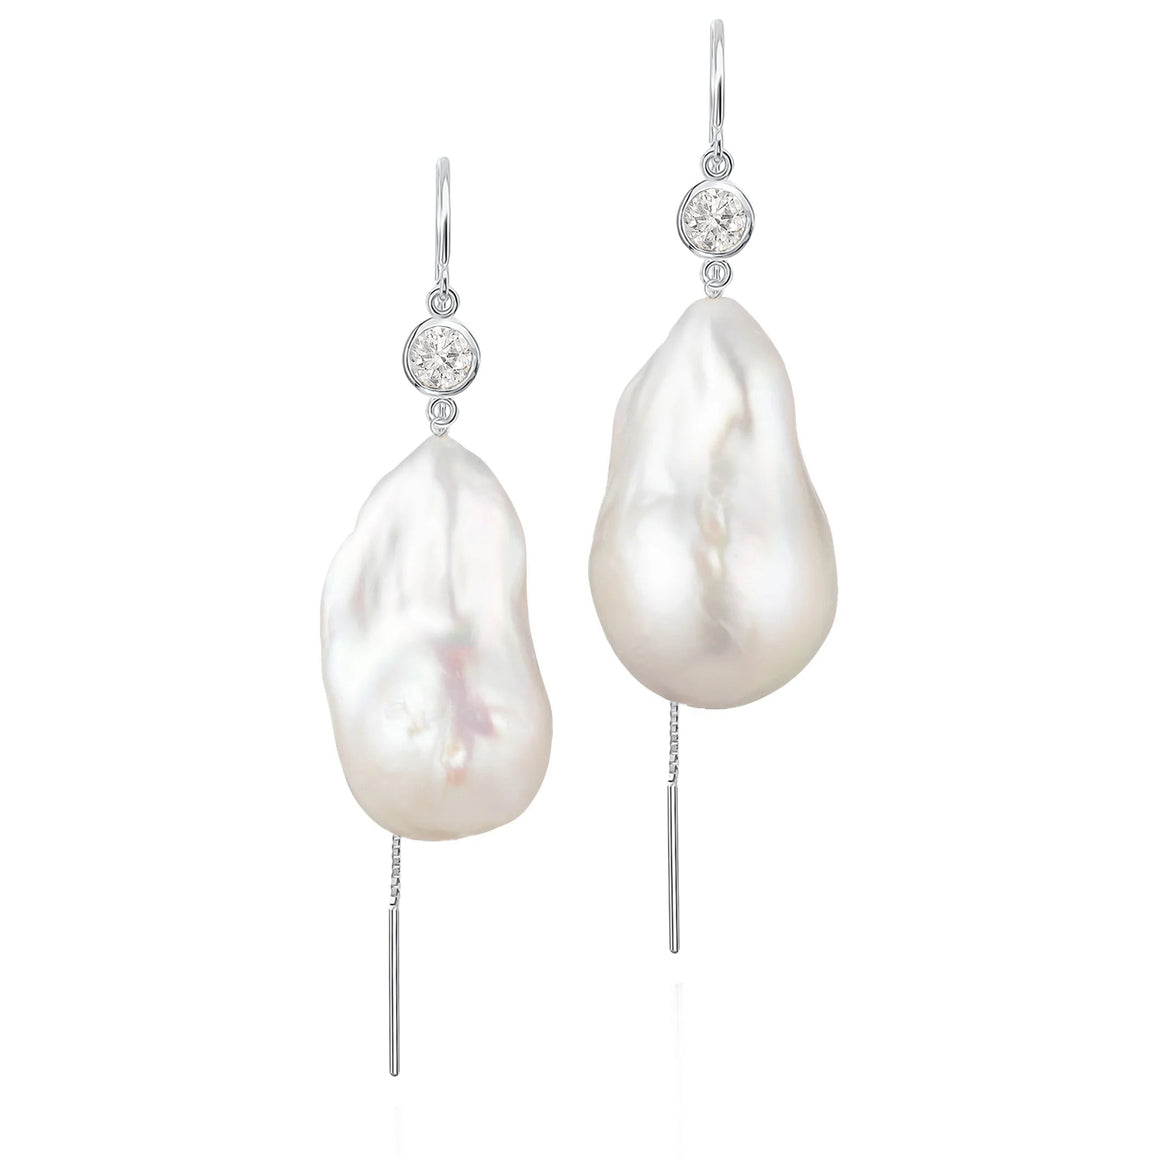 Lab-Grown Diamond And Large Baroque Freshwater Pearl Drop Threader Earrings In 14K White Gold | Sterling Silver